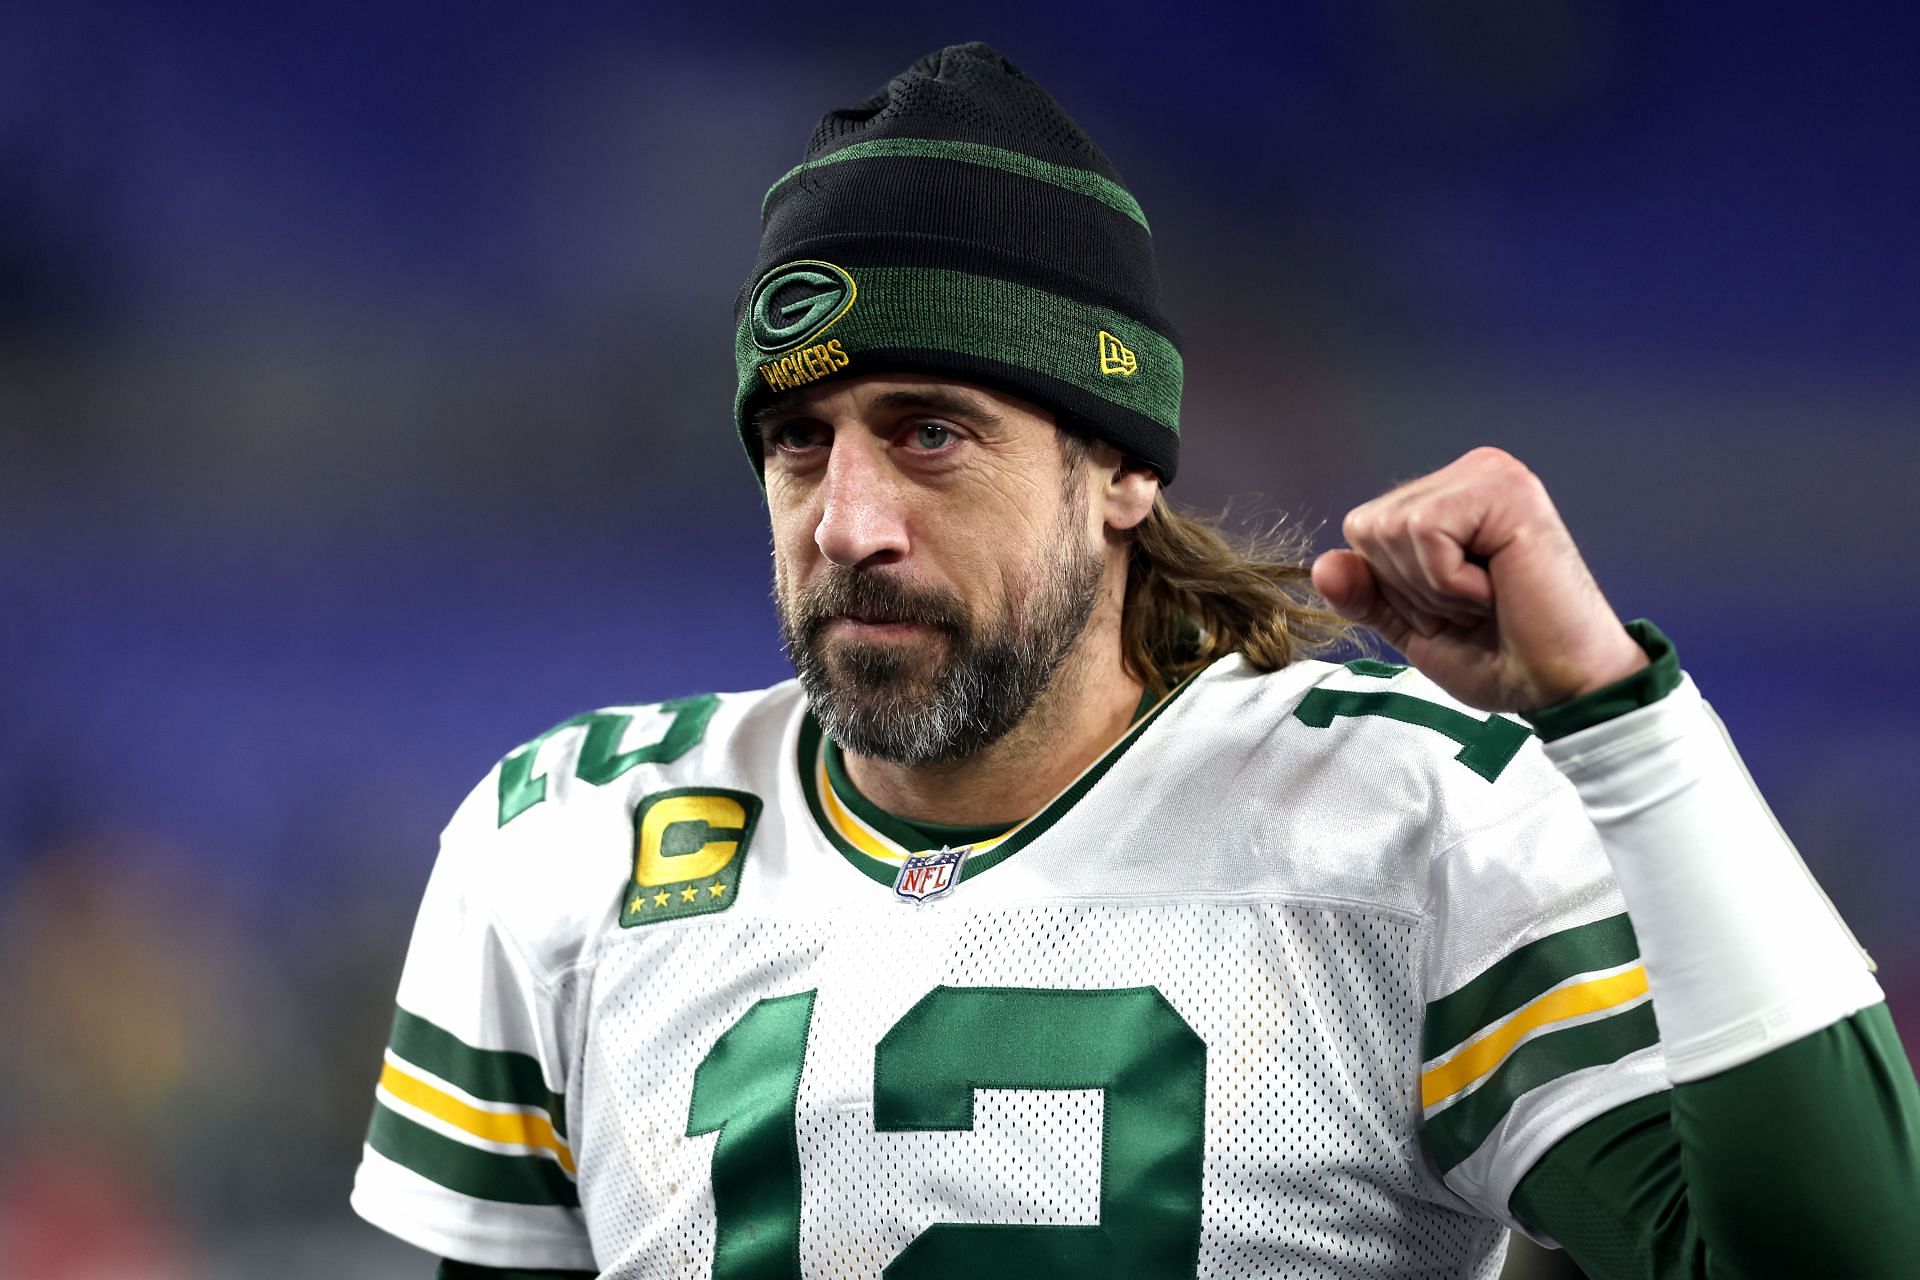 Aaron Rodgers: Green Bay Packers so với Baltimore Ravens